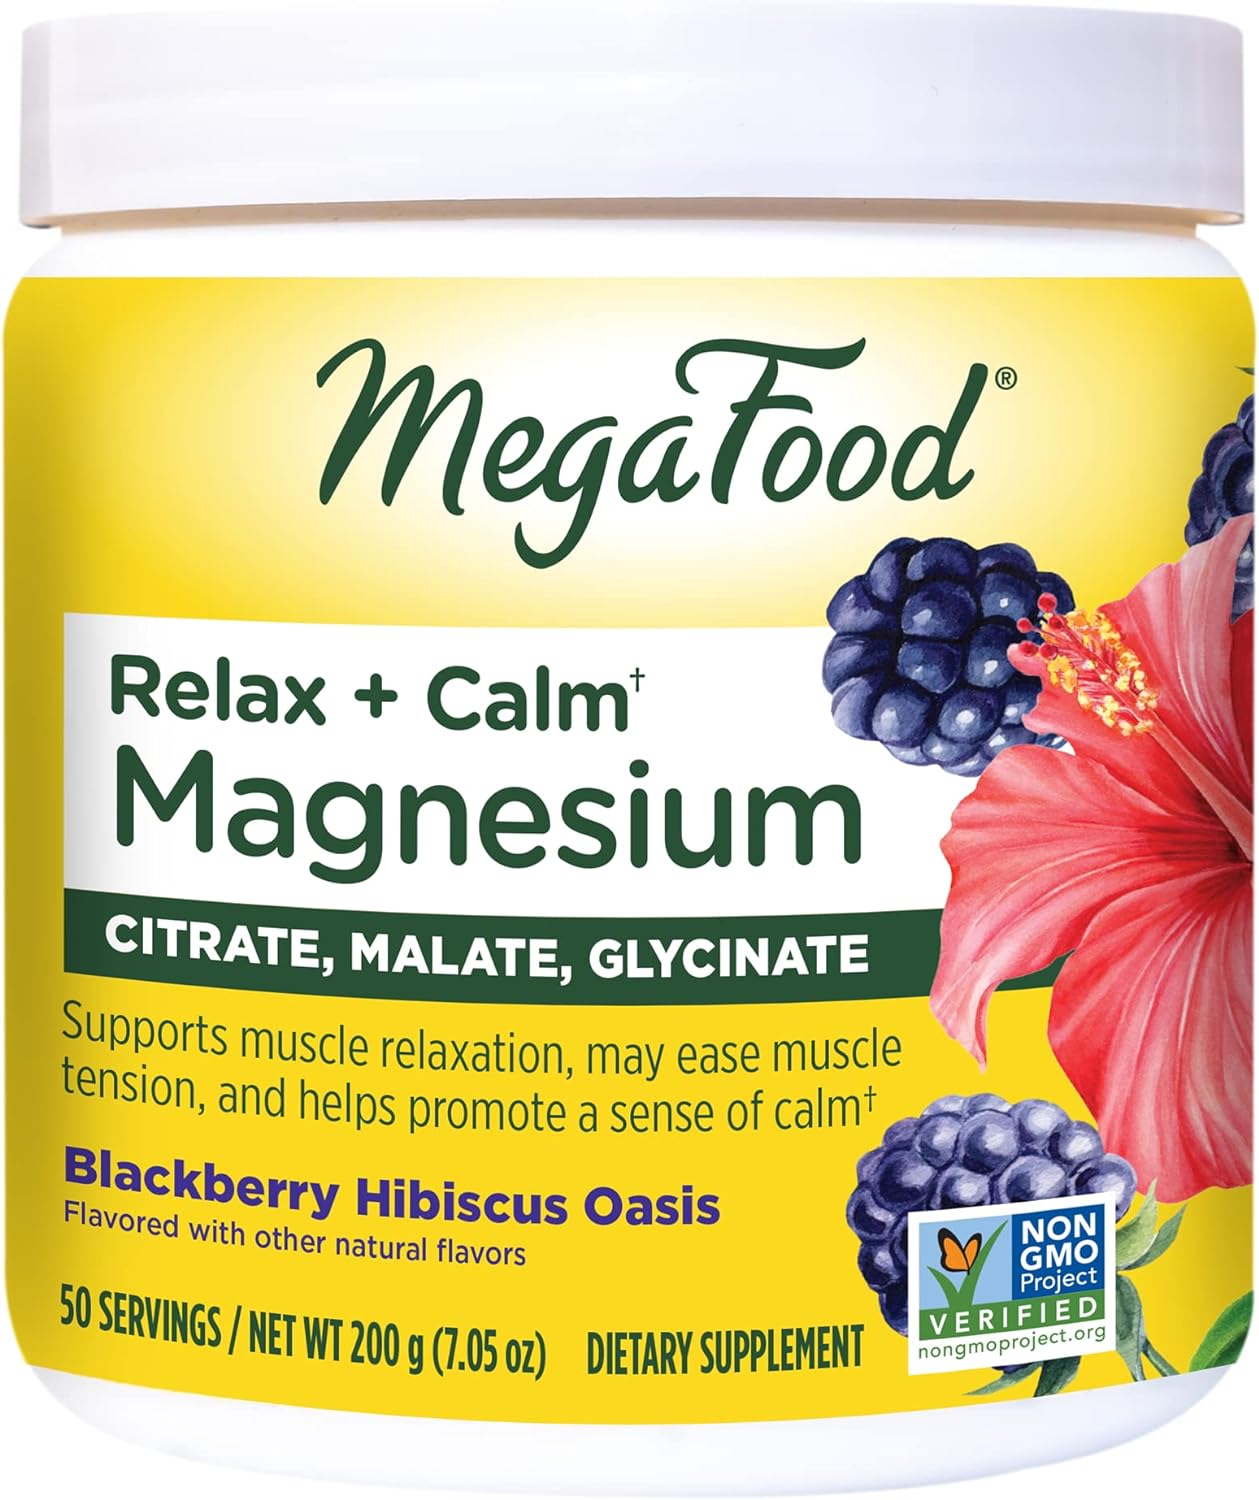 MegaFood Relax + Calm Magnesium Powder - Highly Absorbable Magnesium Glycinate, Magnesium Citrate & Magnesium Malate - Without 9 Food Allergens - Blackberry Hibiscus Oasis - 7.05 Oz (50 Servings)